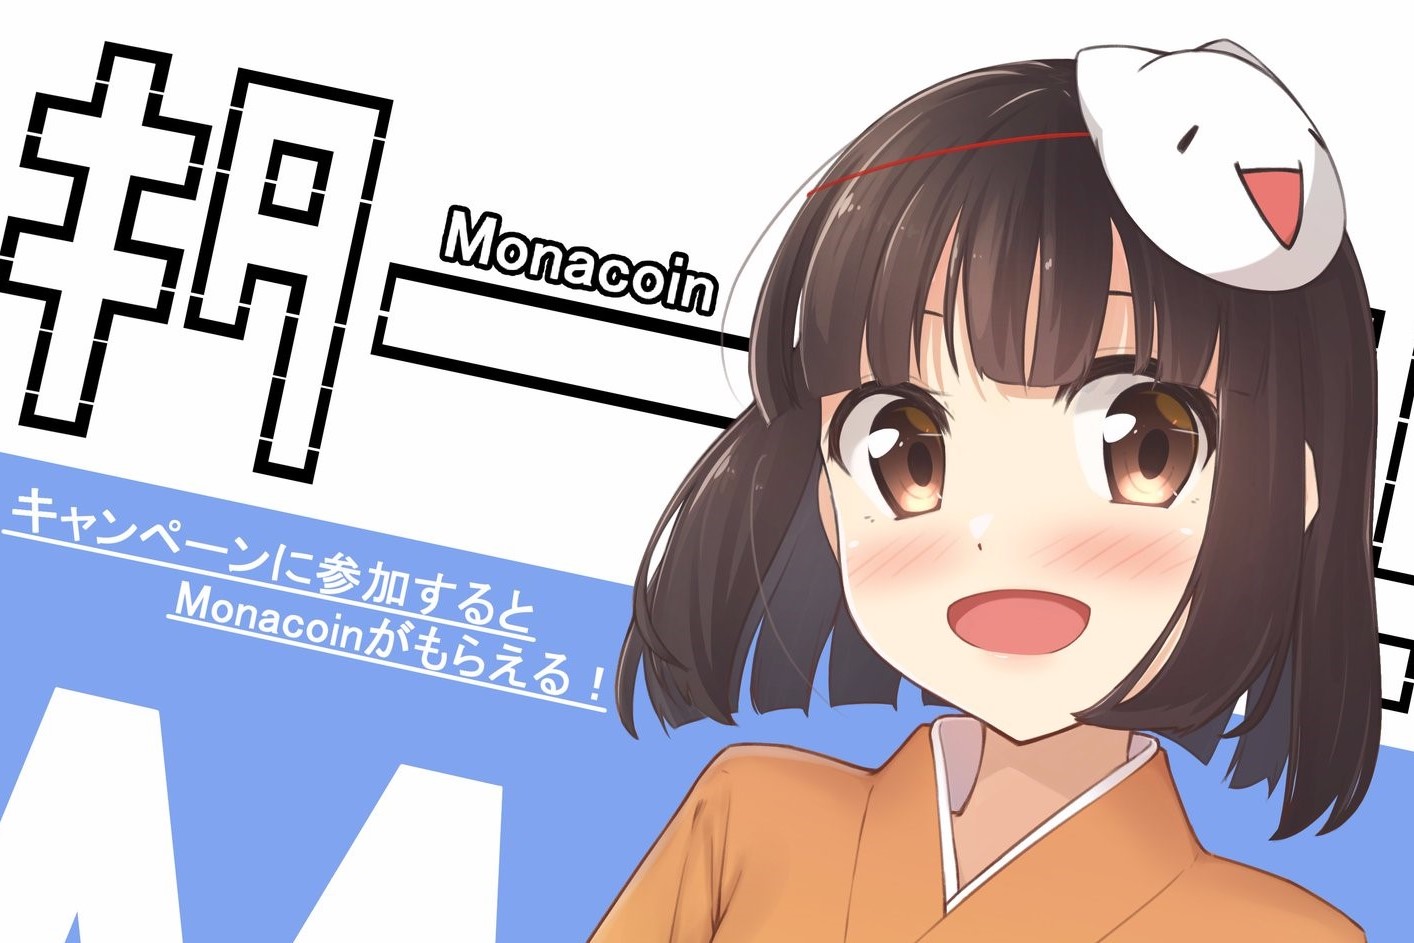 Manga-themed Monacoin Hacked, Miner Suspected – Report